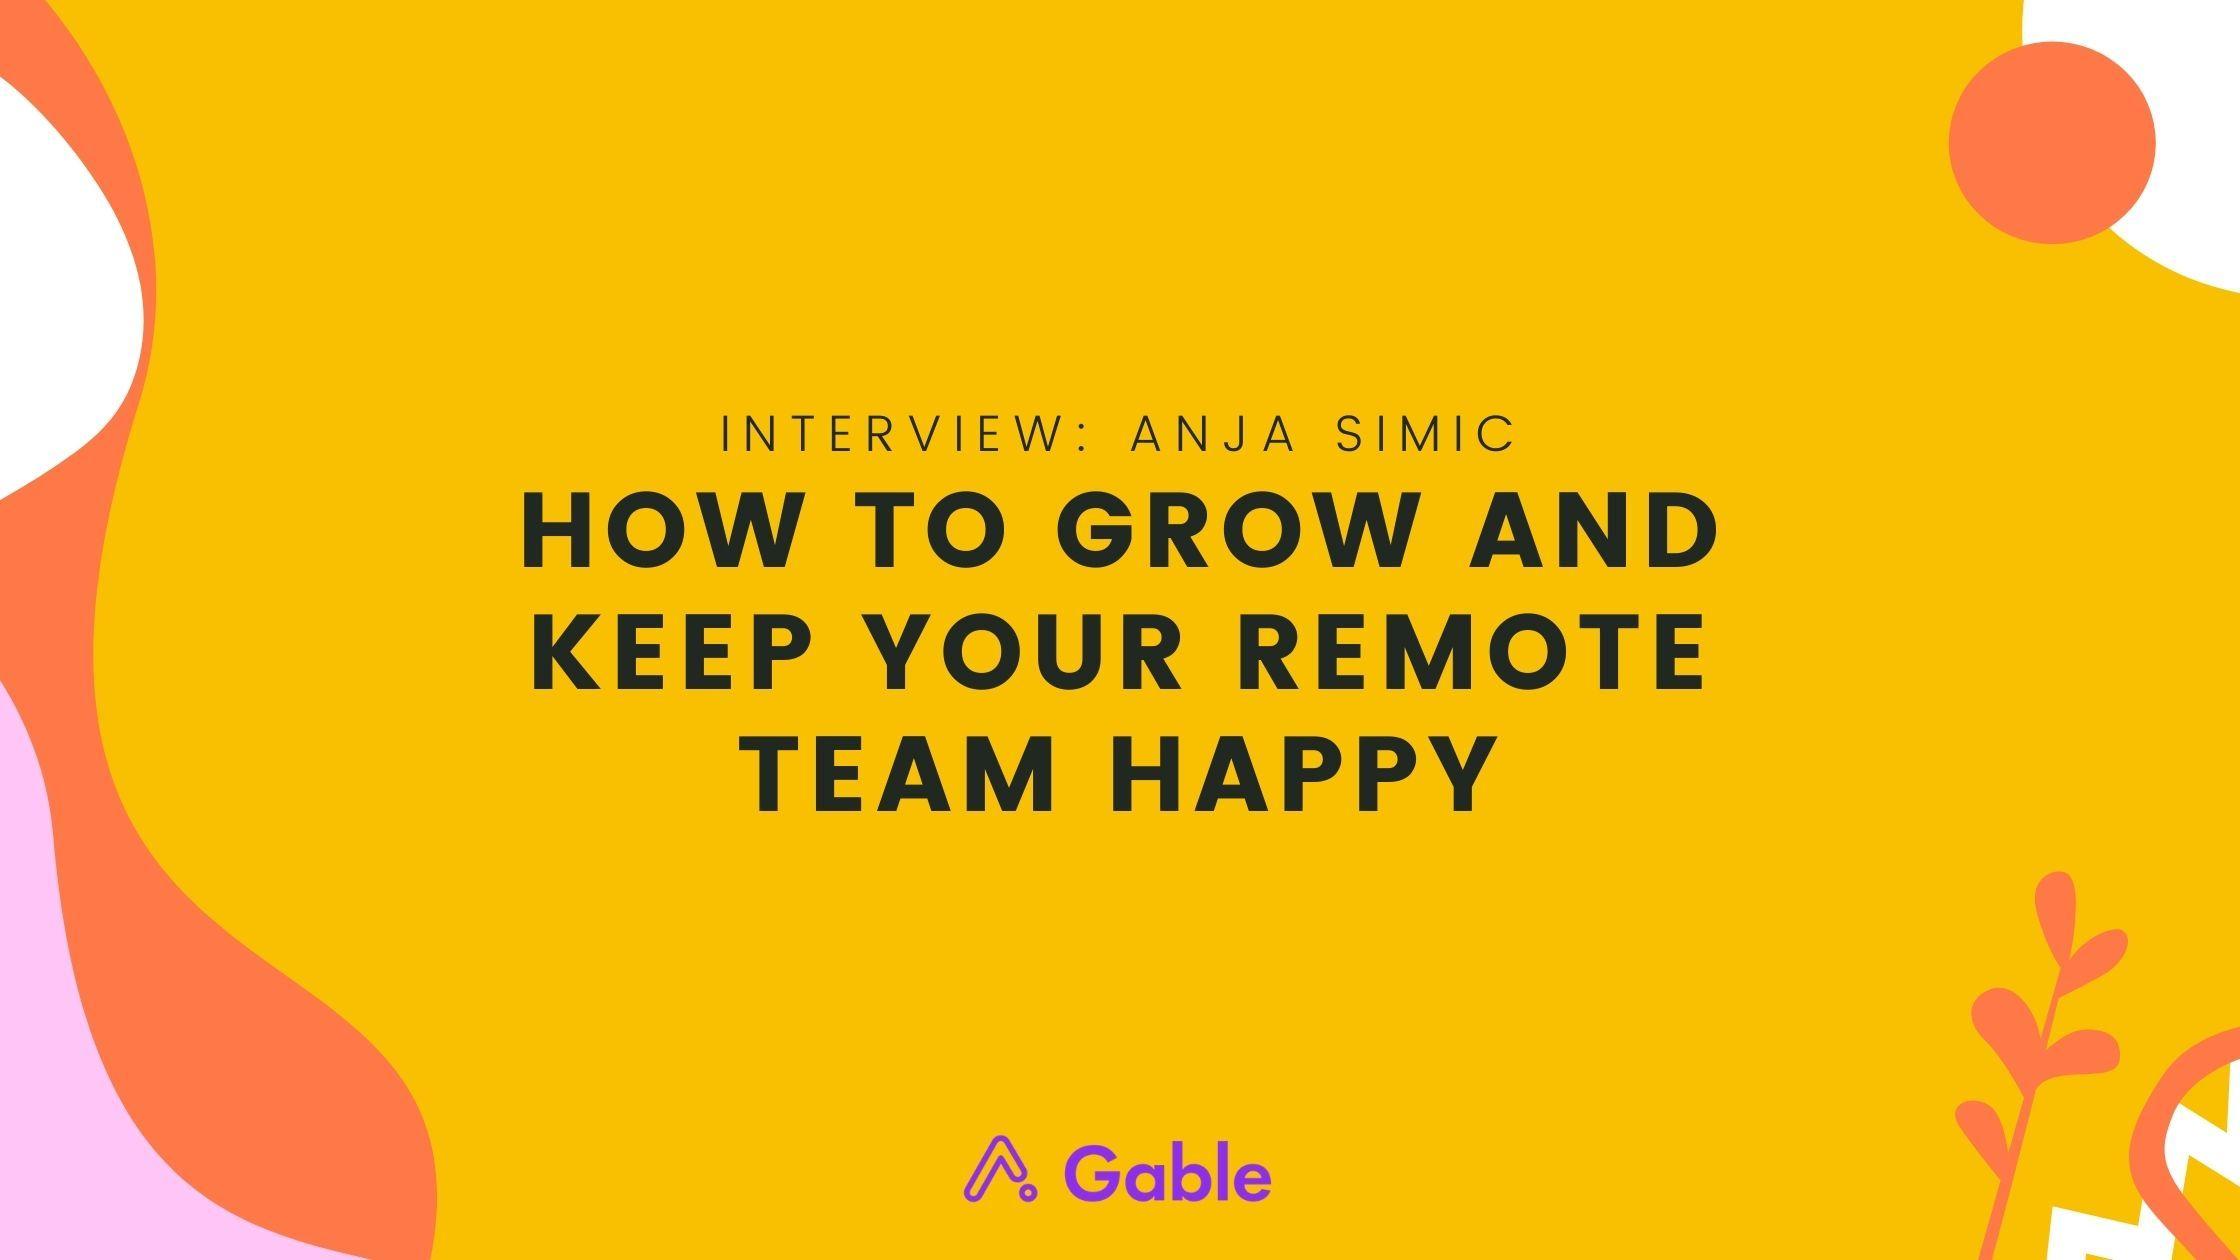 How to grow and keep your remote team happy